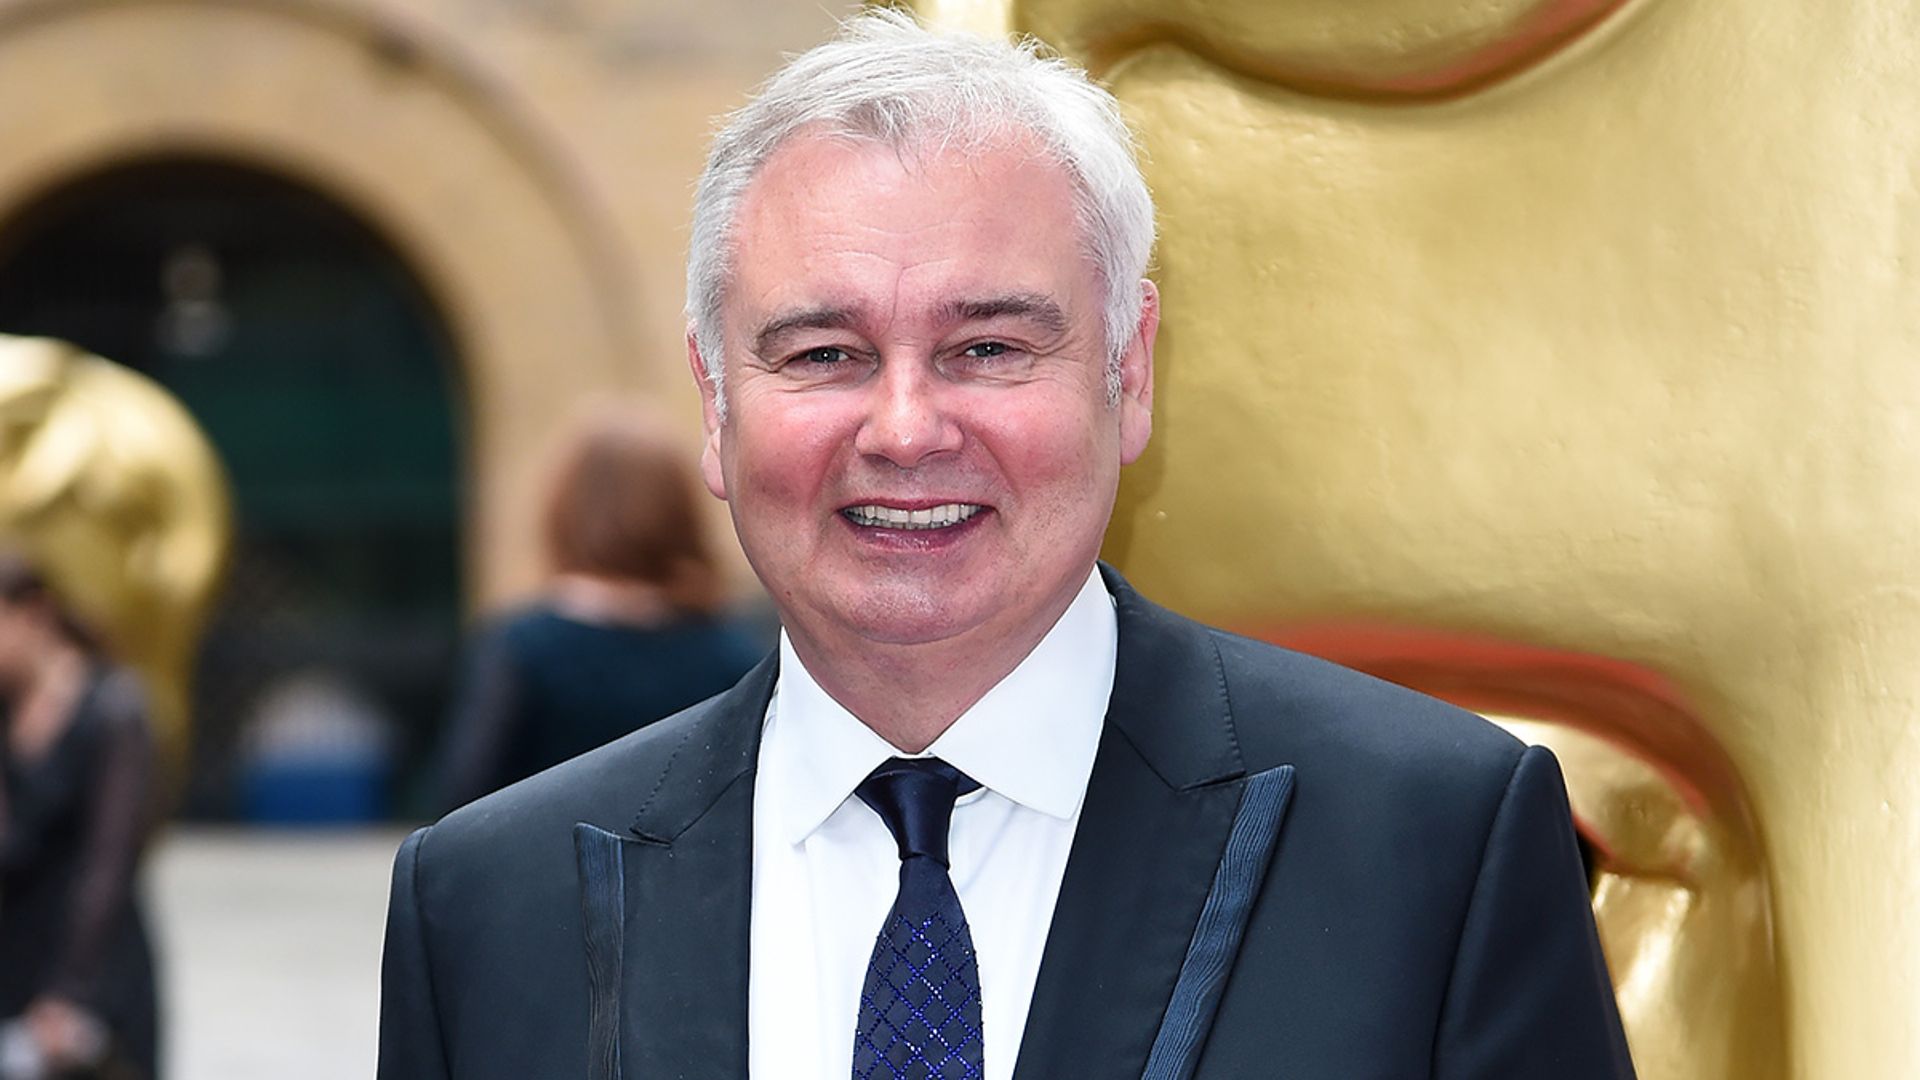 Eamonn Holmes reveals very exciting new adventure